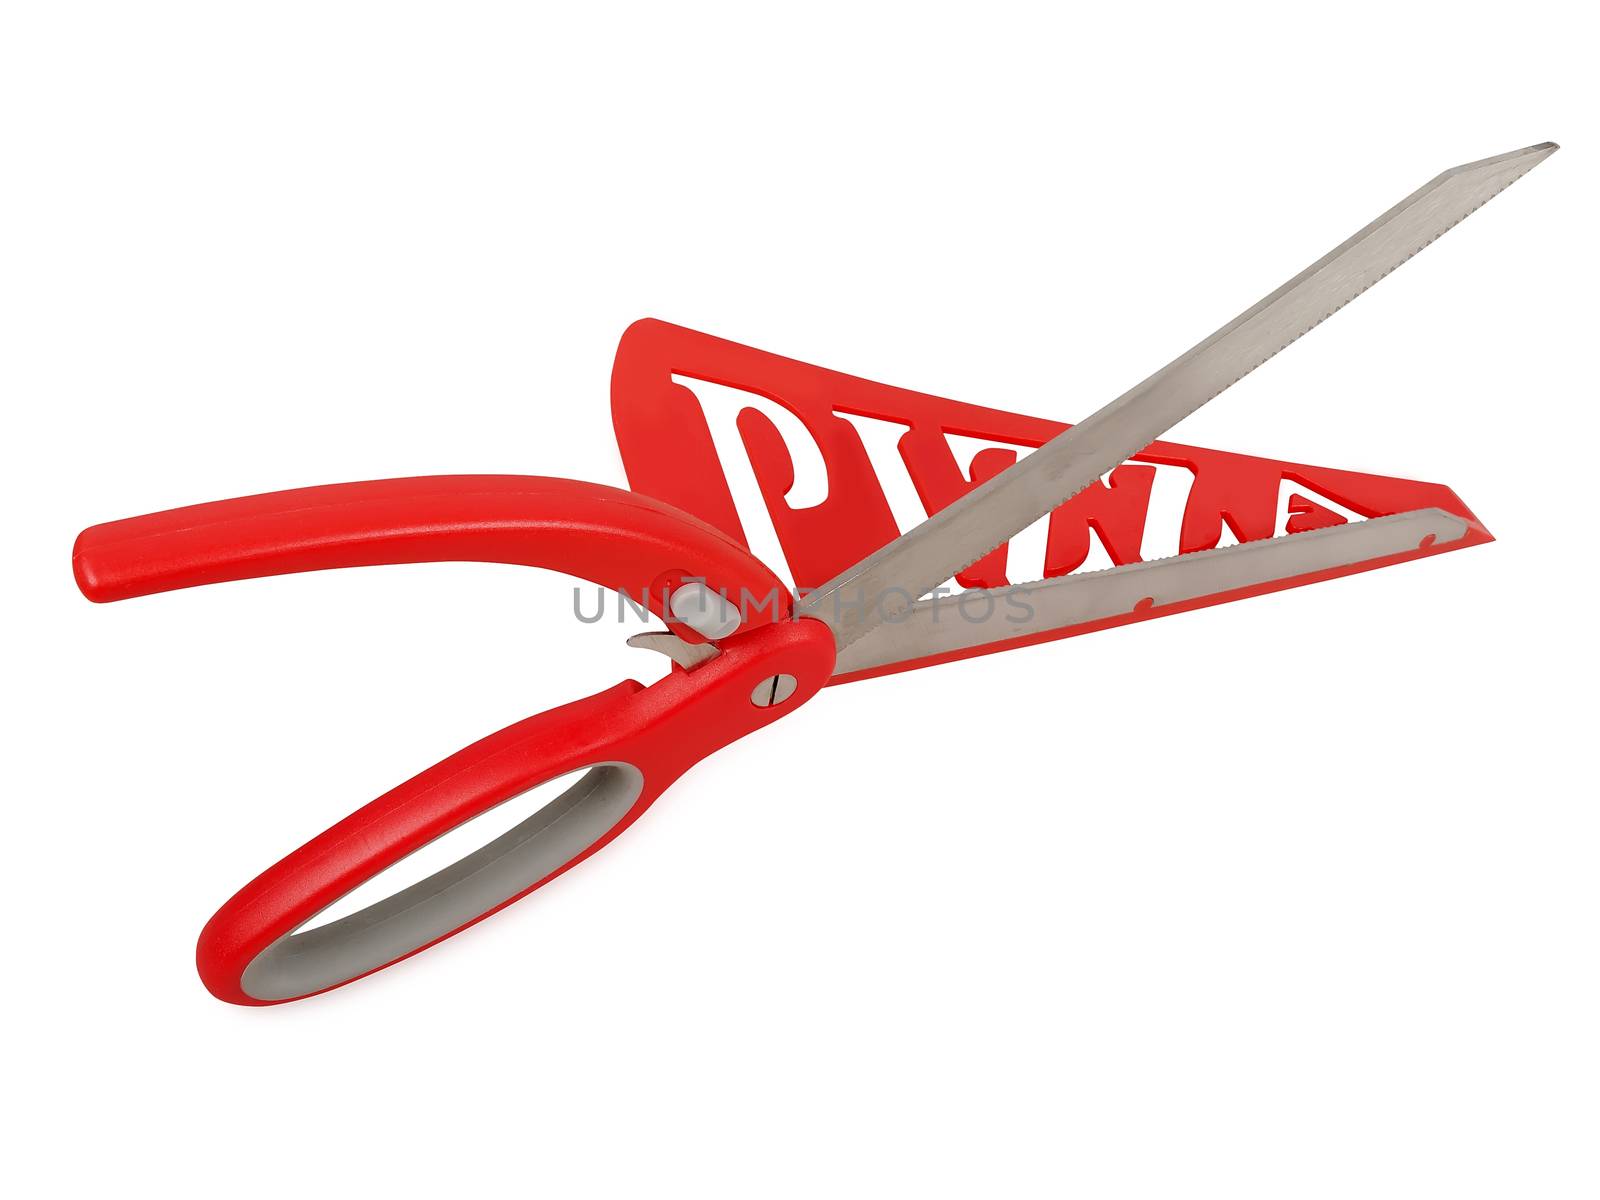 Pizza scissors isolated by sewer12